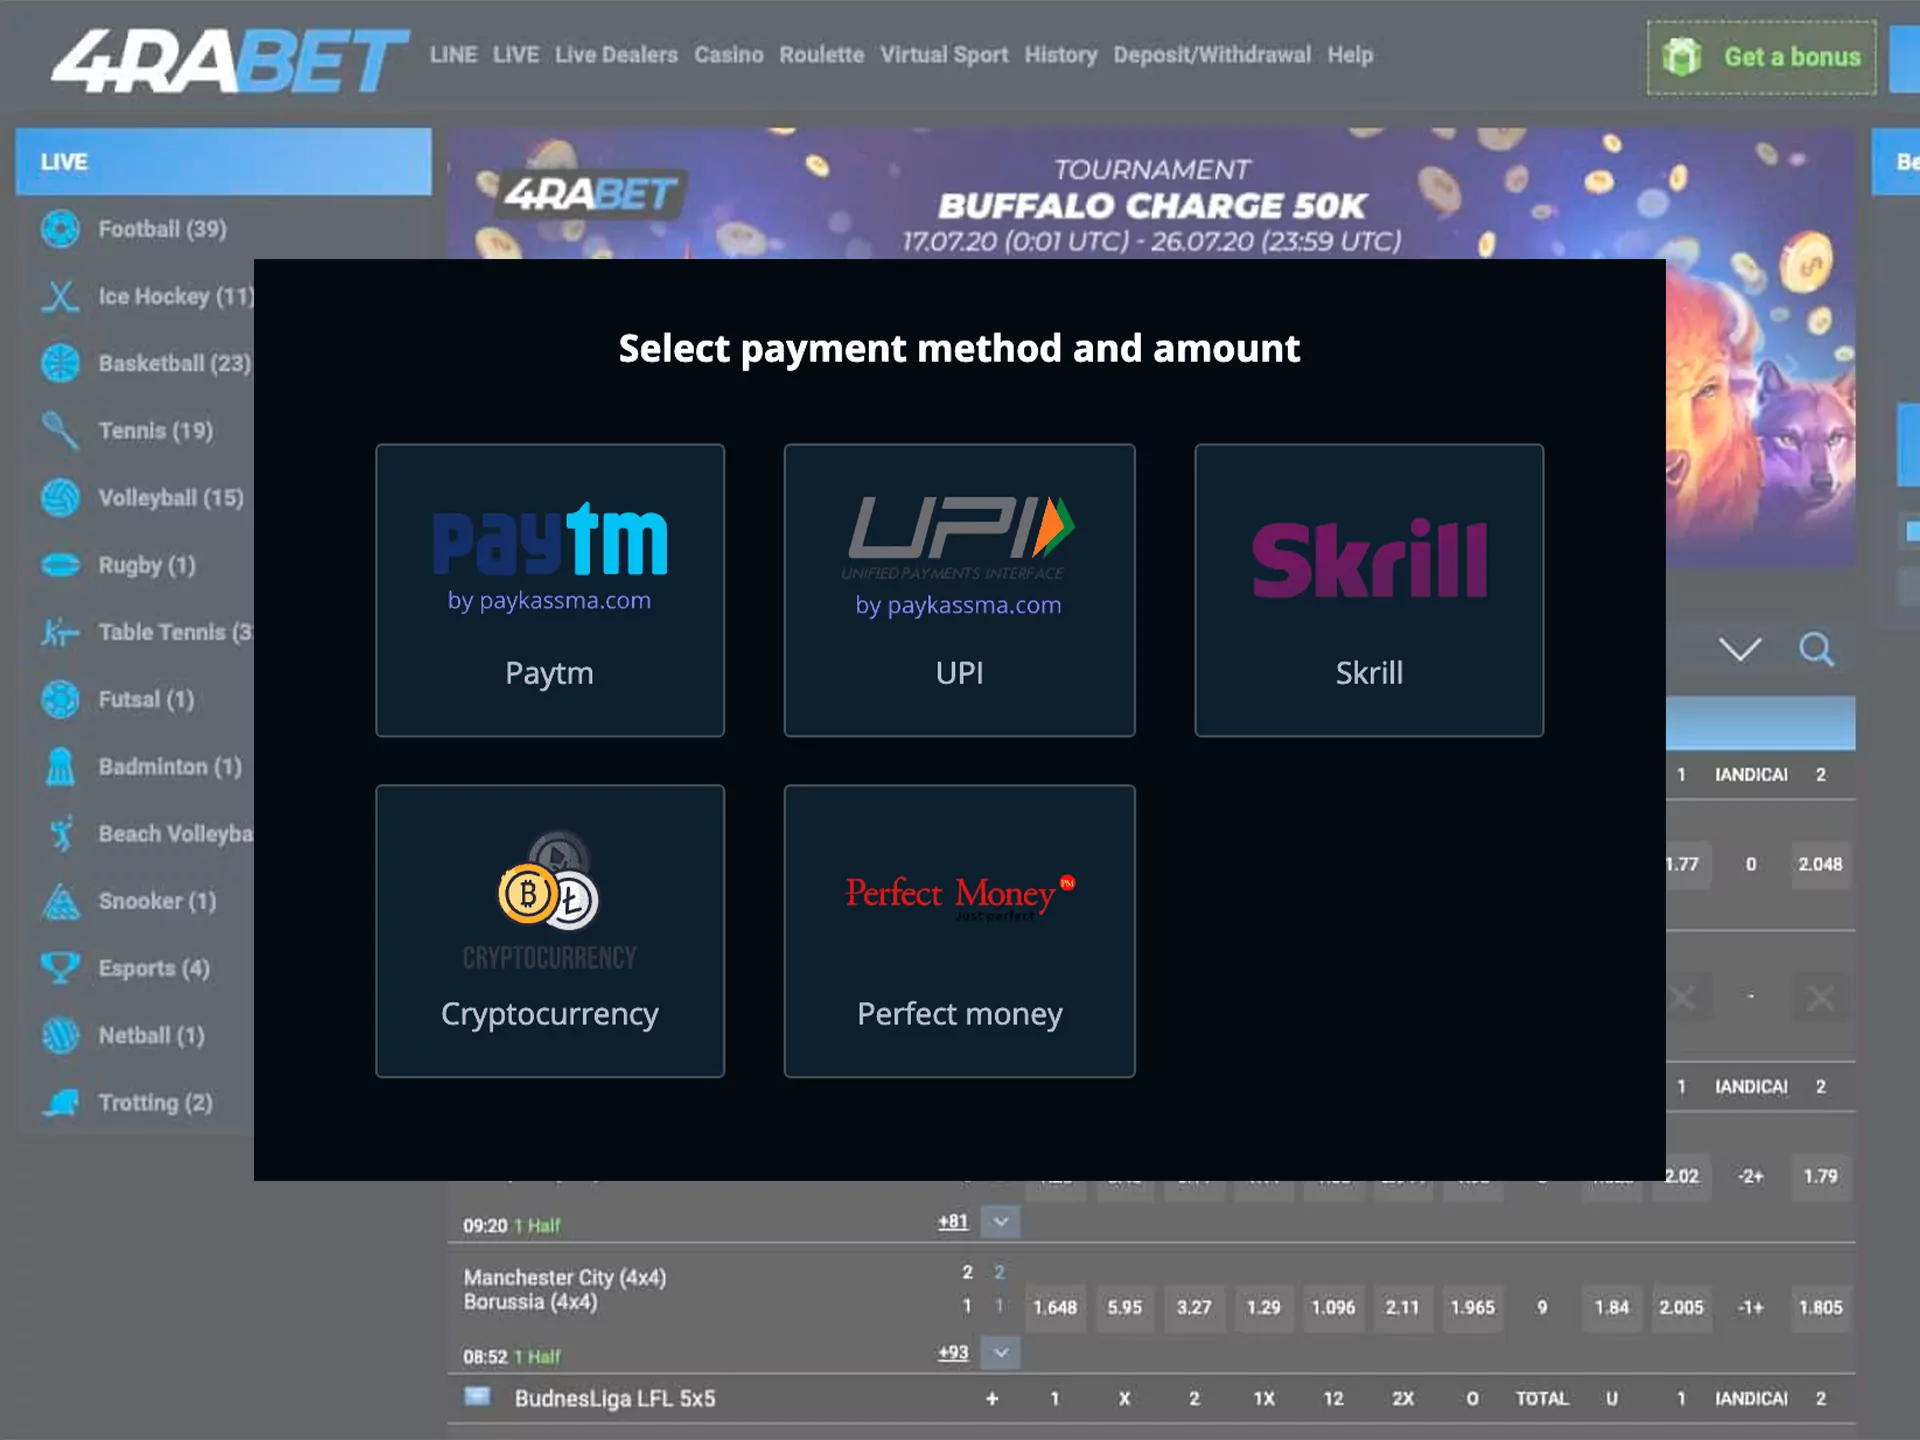 You can withdraw your winnings the same wat you made a deposit.